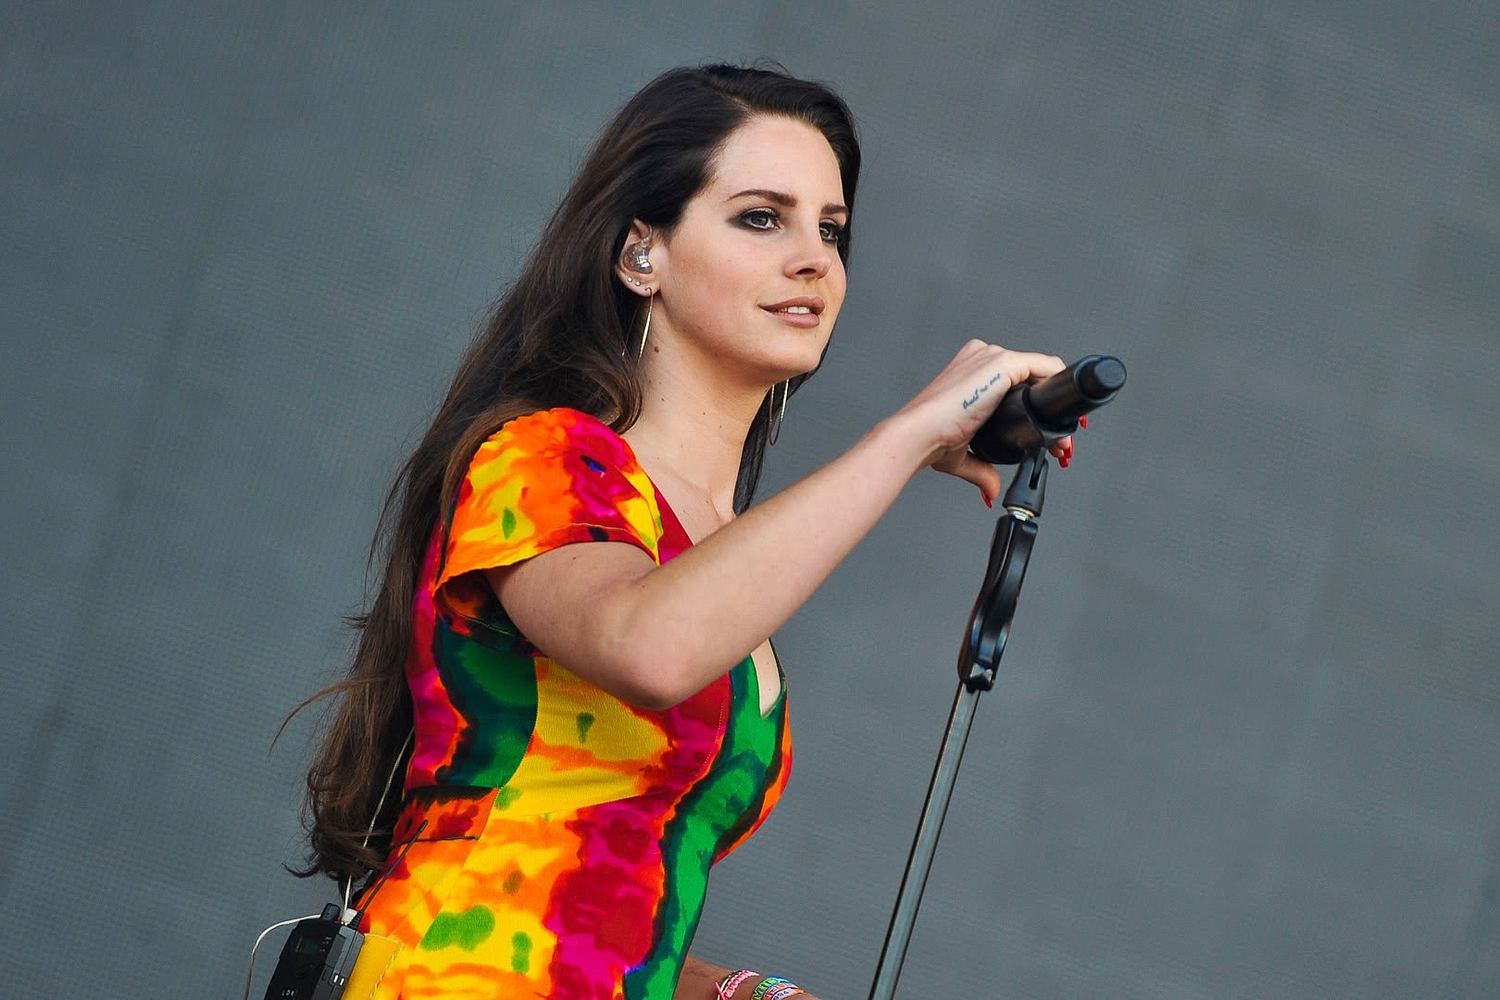 Lana Del Rey, Skepta and more announced for Lollapalooza Paris • News